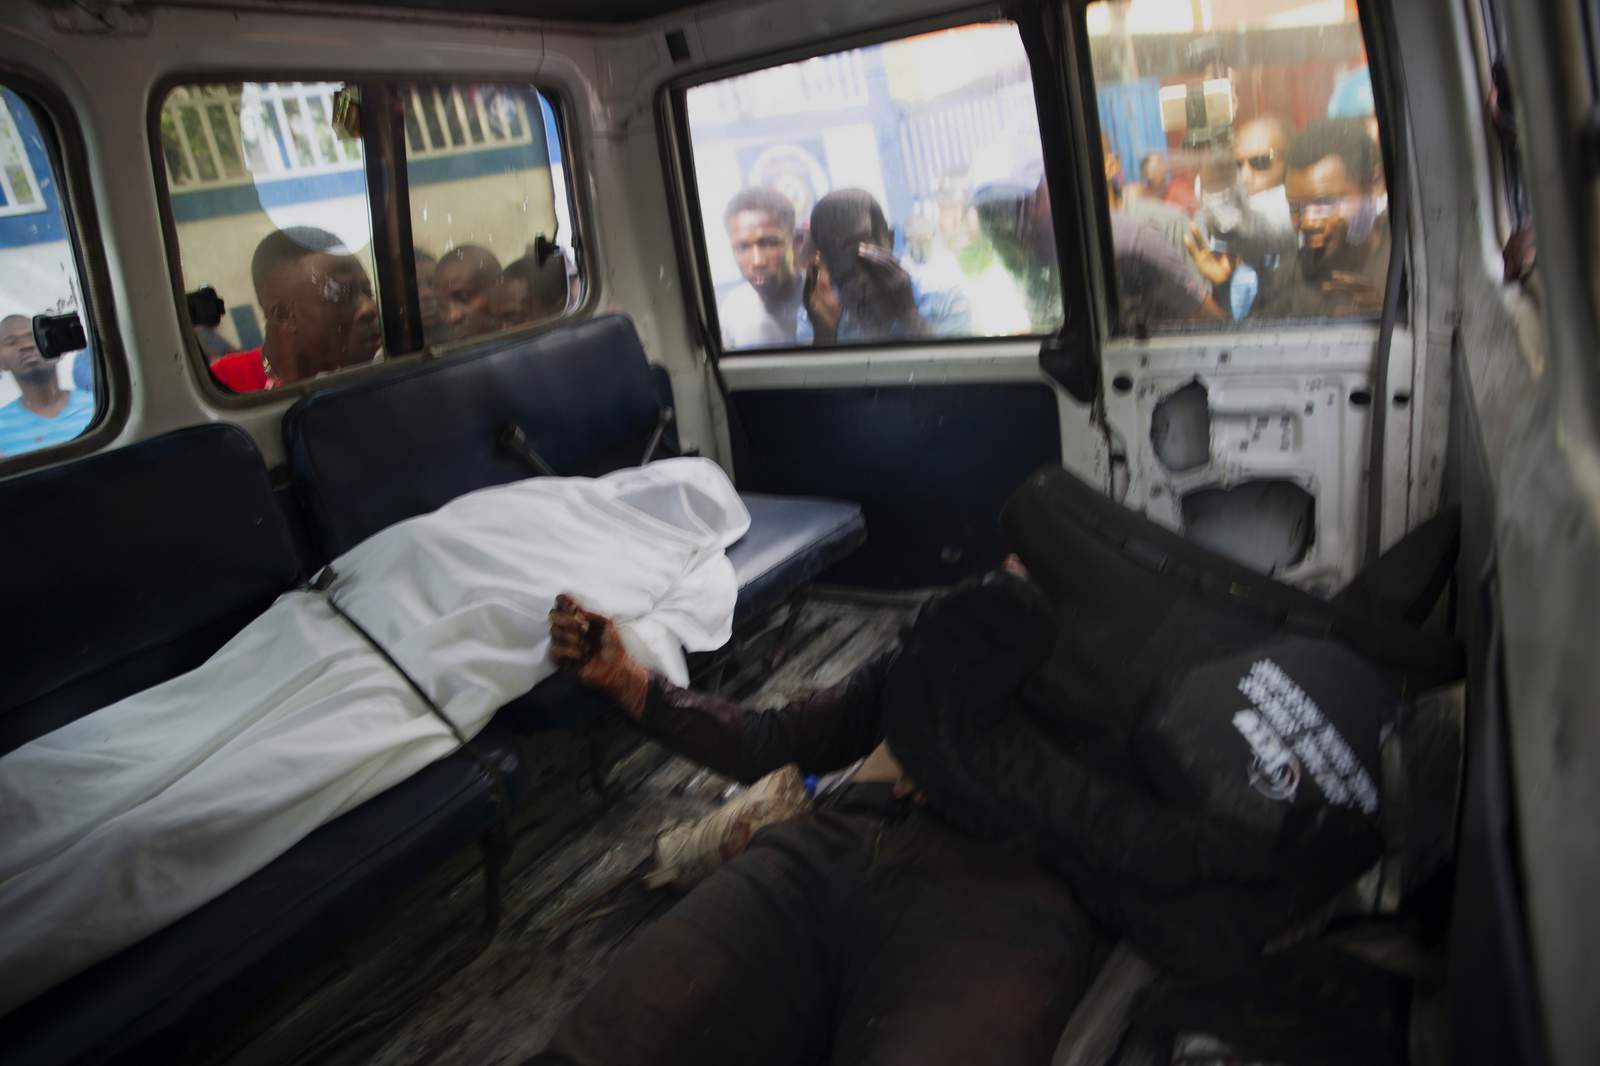 People look into the window of a police car carrying the bodies of two people killed in a shooting with police in Port-au-Prince, Haiti, Thursday, July 8, 2021. According to Police Chief Leon Charles, the two dead are suspects in the assassination of Haitian President Jovenel Mose. (AP Photo/Joseph Odelyn)